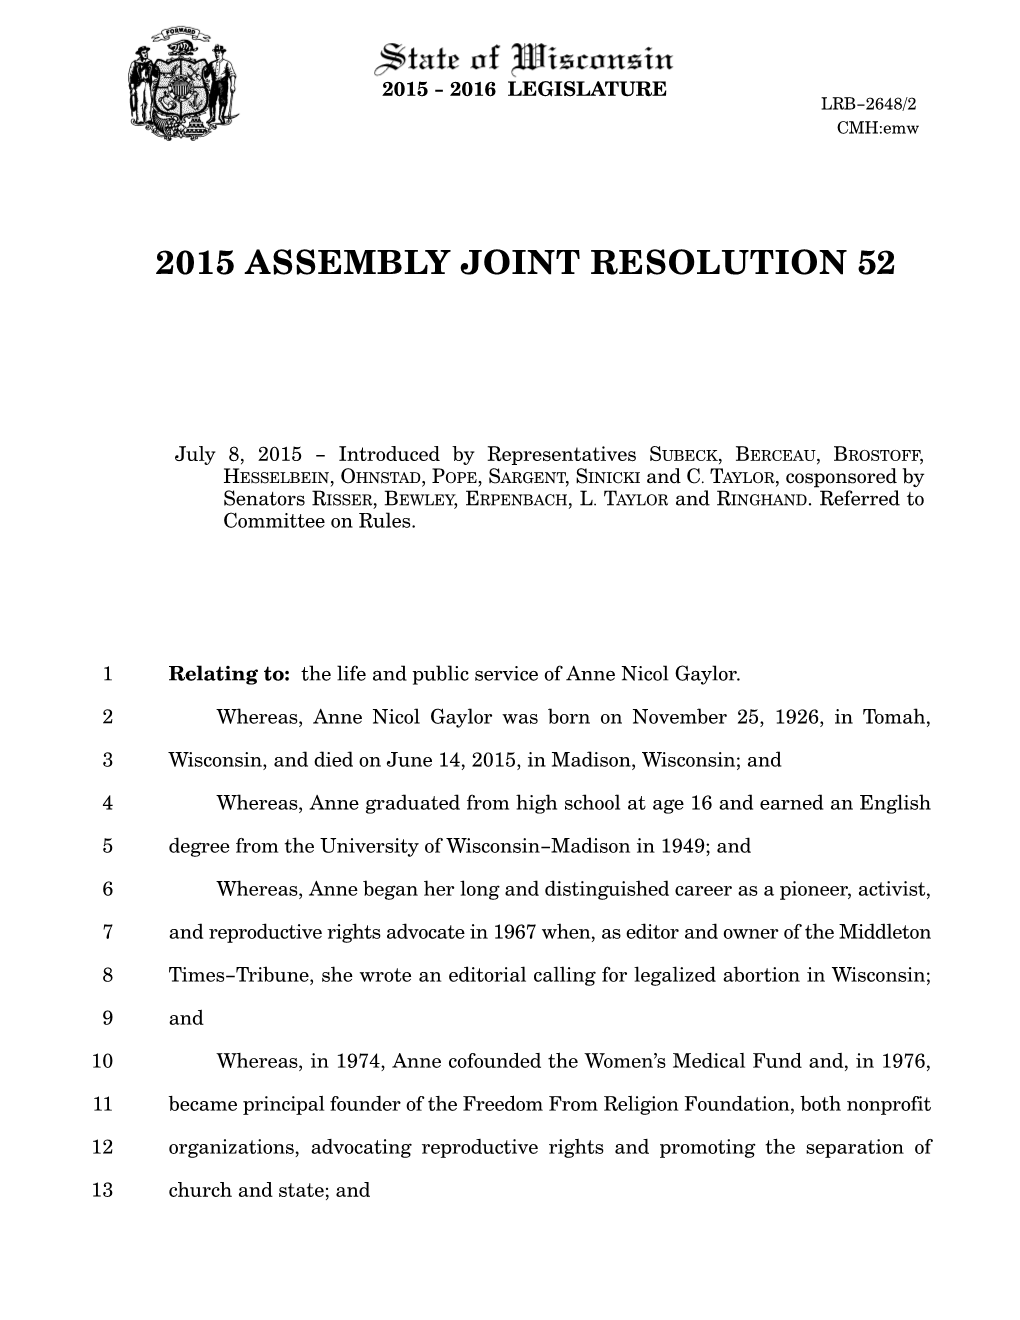 2015 Assembly Joint Resolution 52